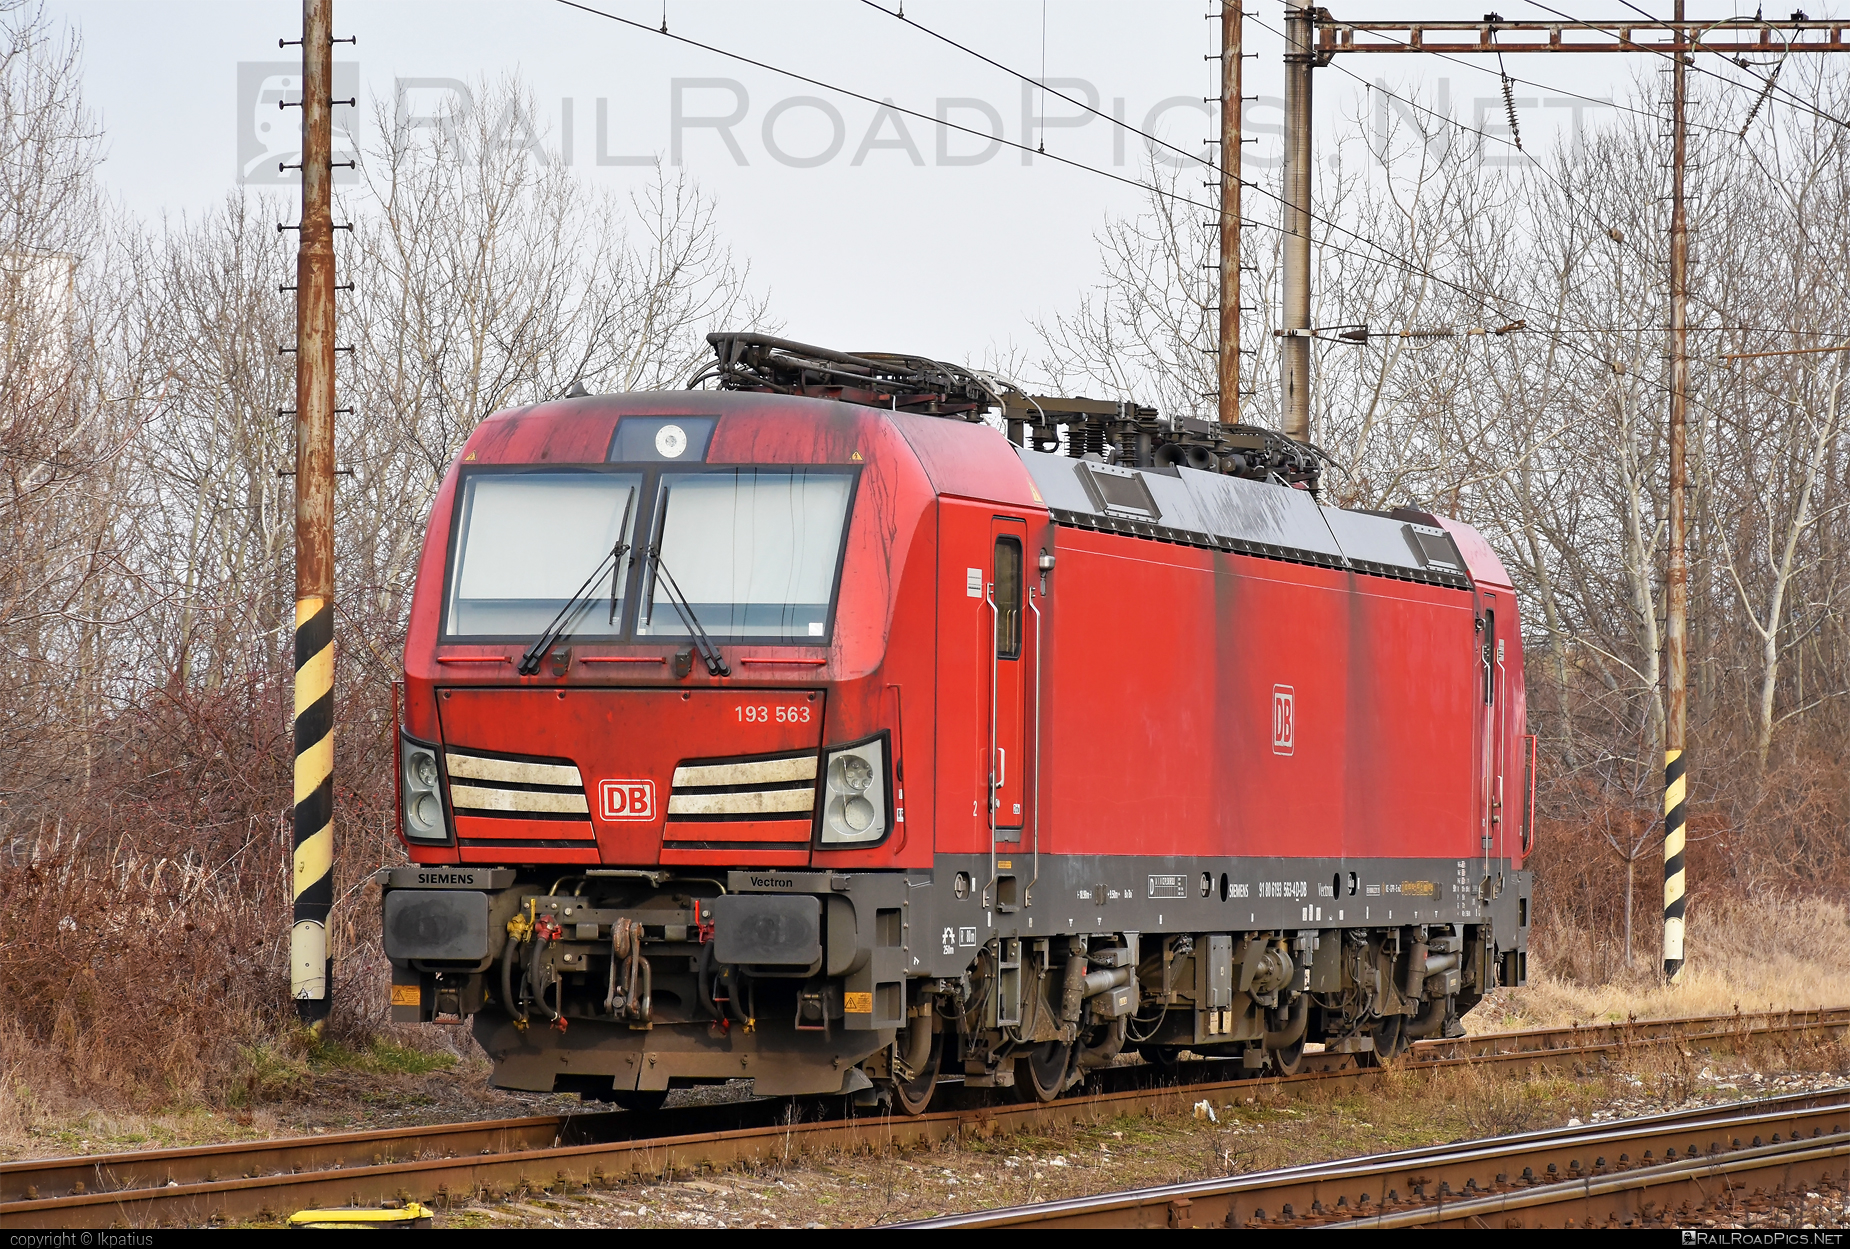 Siemens Vectron MS - 193 563 operated by DB Cargo AG #db #dbcargo #dbcargoag #deutschebahn #siemens #siemensVectron #siemensVectronMS #vectron #vectronMS